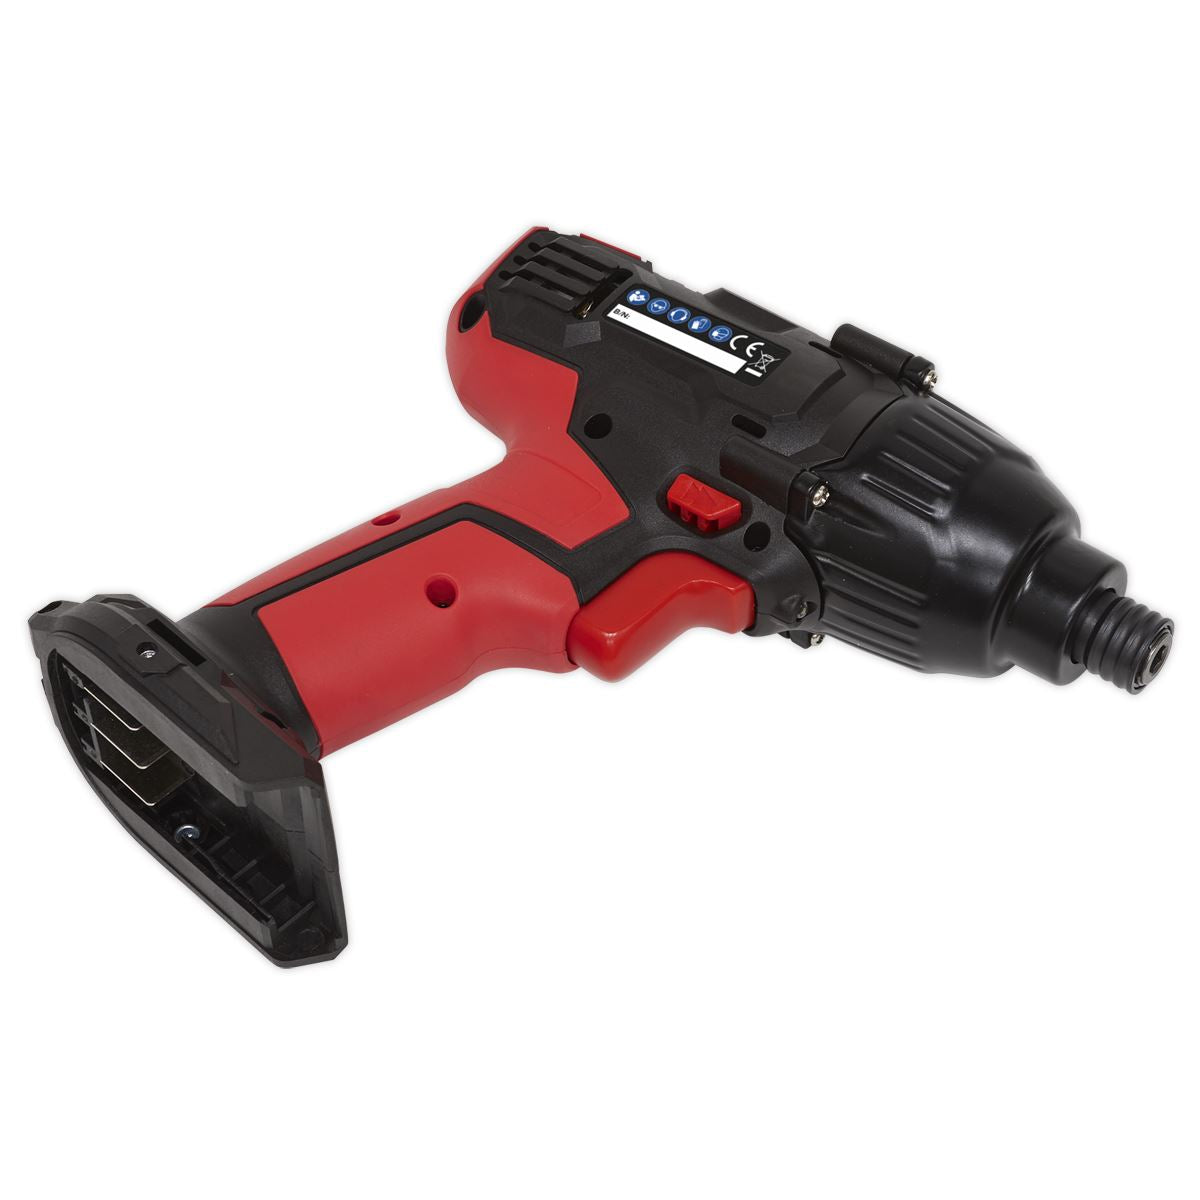 Sealey Impact Driver 20V SV20 Series 1/4"Hex Drive - Body Only